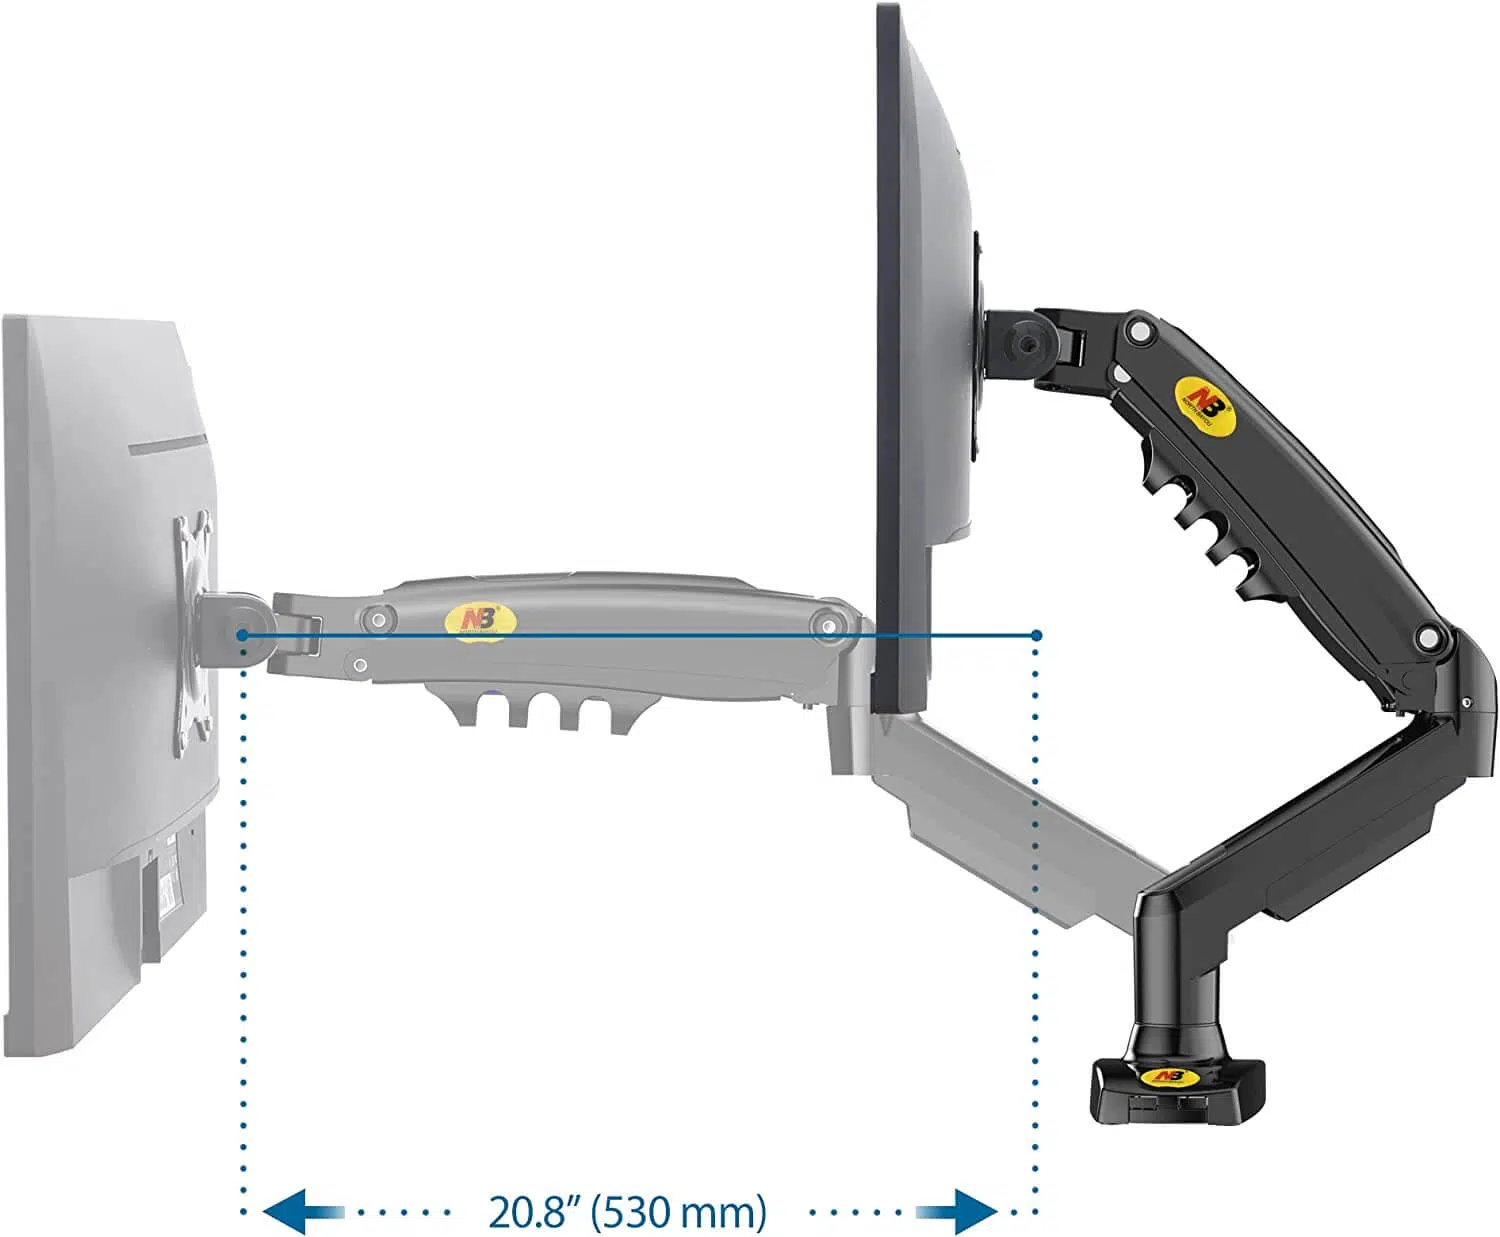 MONITOR DESK MOUNT STAND